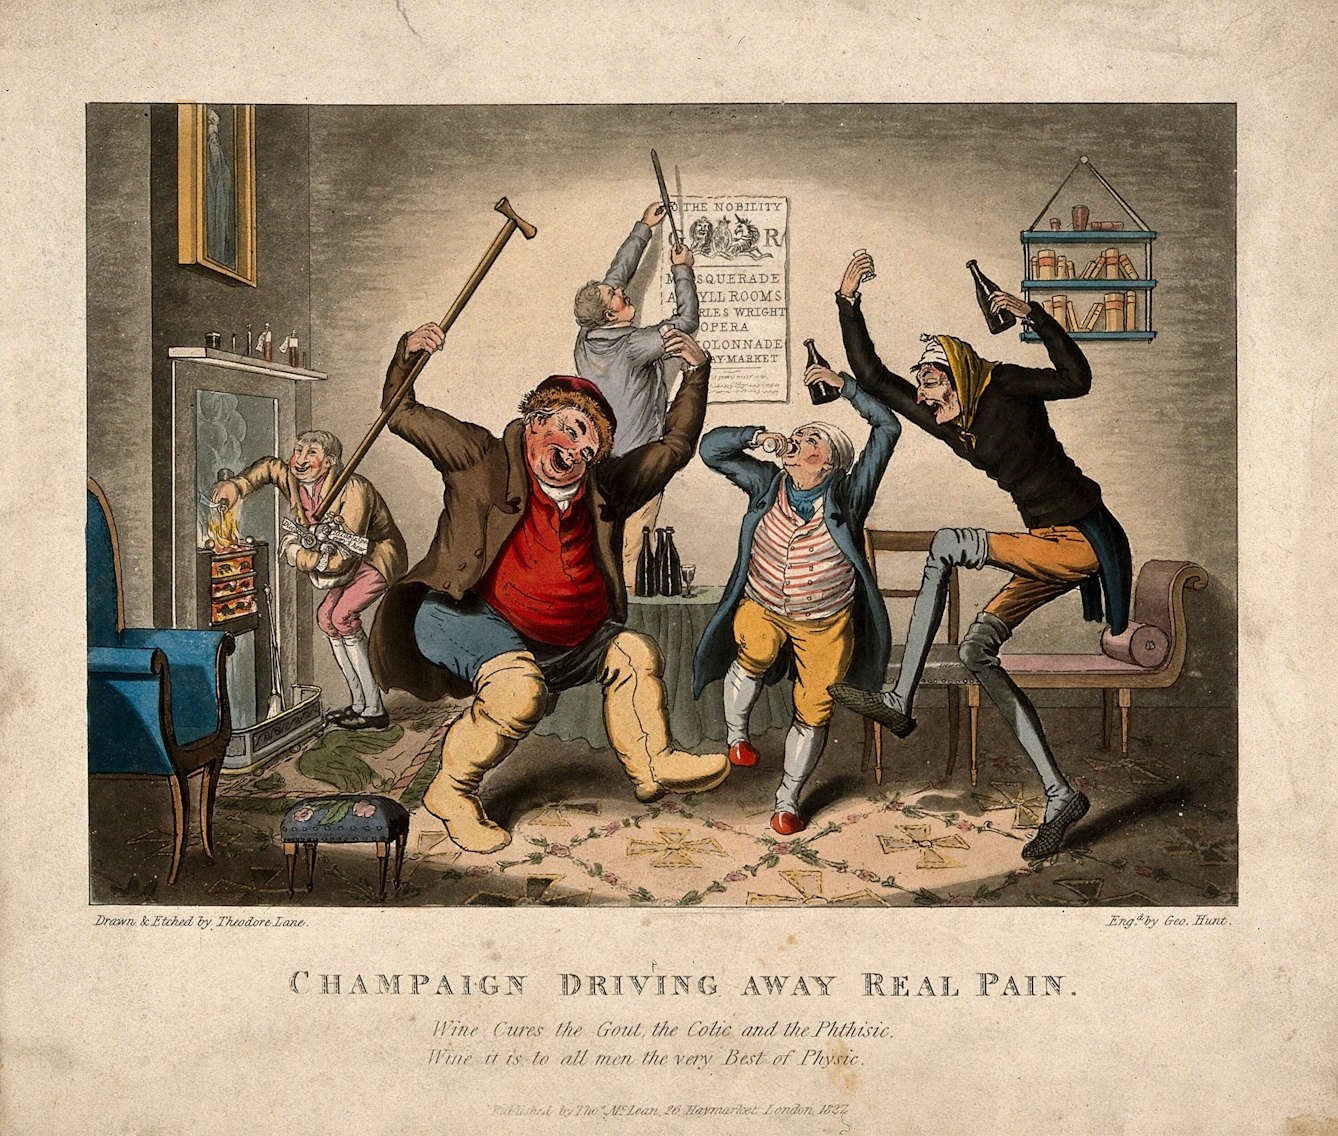 A colour illustration showing three men in high spirits and leaping about. Two are holding bottles of beer, one is drinking from a glass. In the background, a man puts fuel on an open fire, while another pins up a poster.